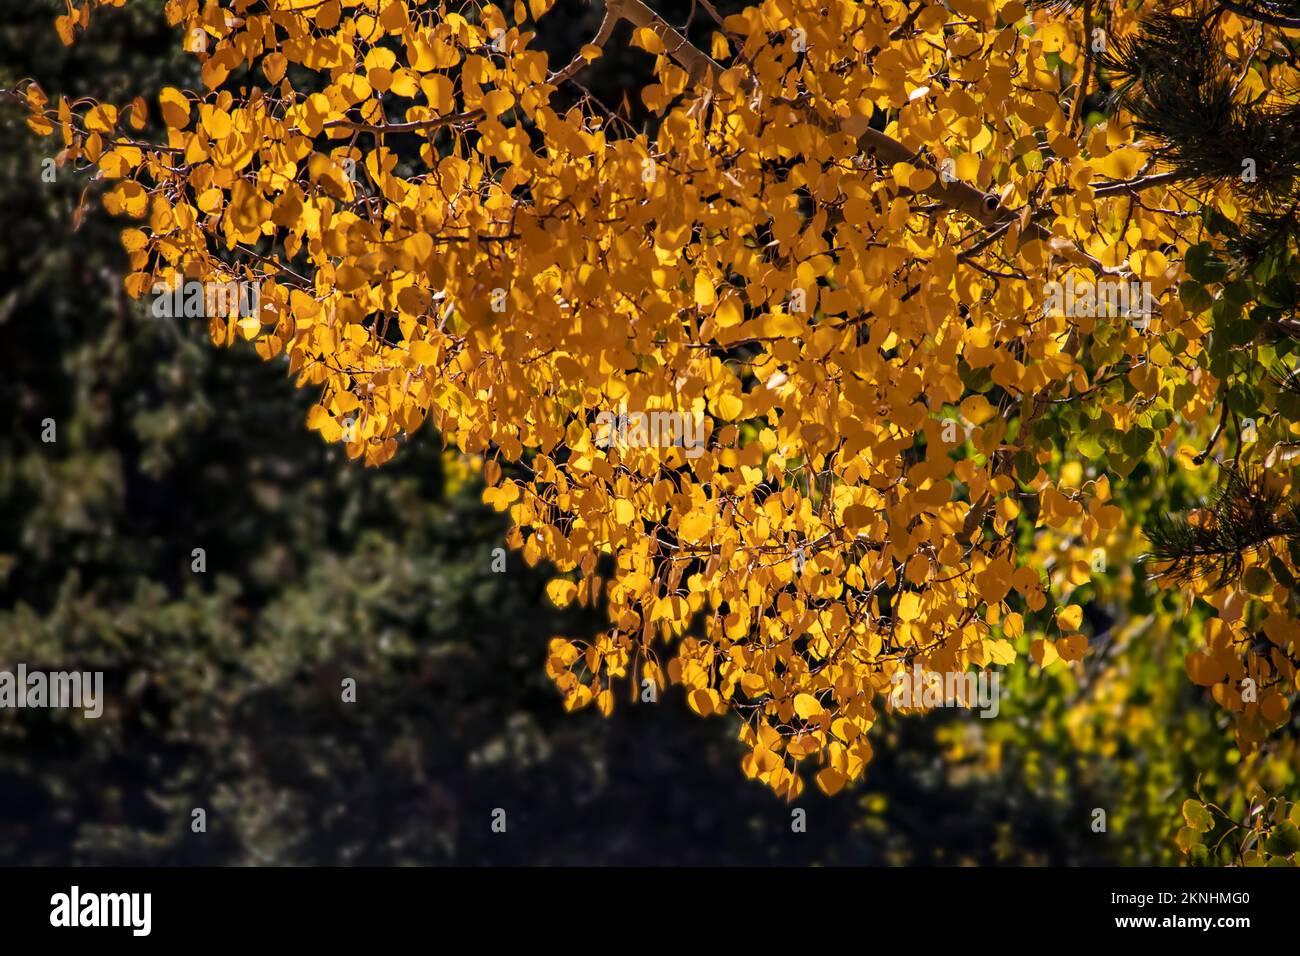 Background - Autumn in the Rockies - closeup of yellow Aspen leaves Stock Photo